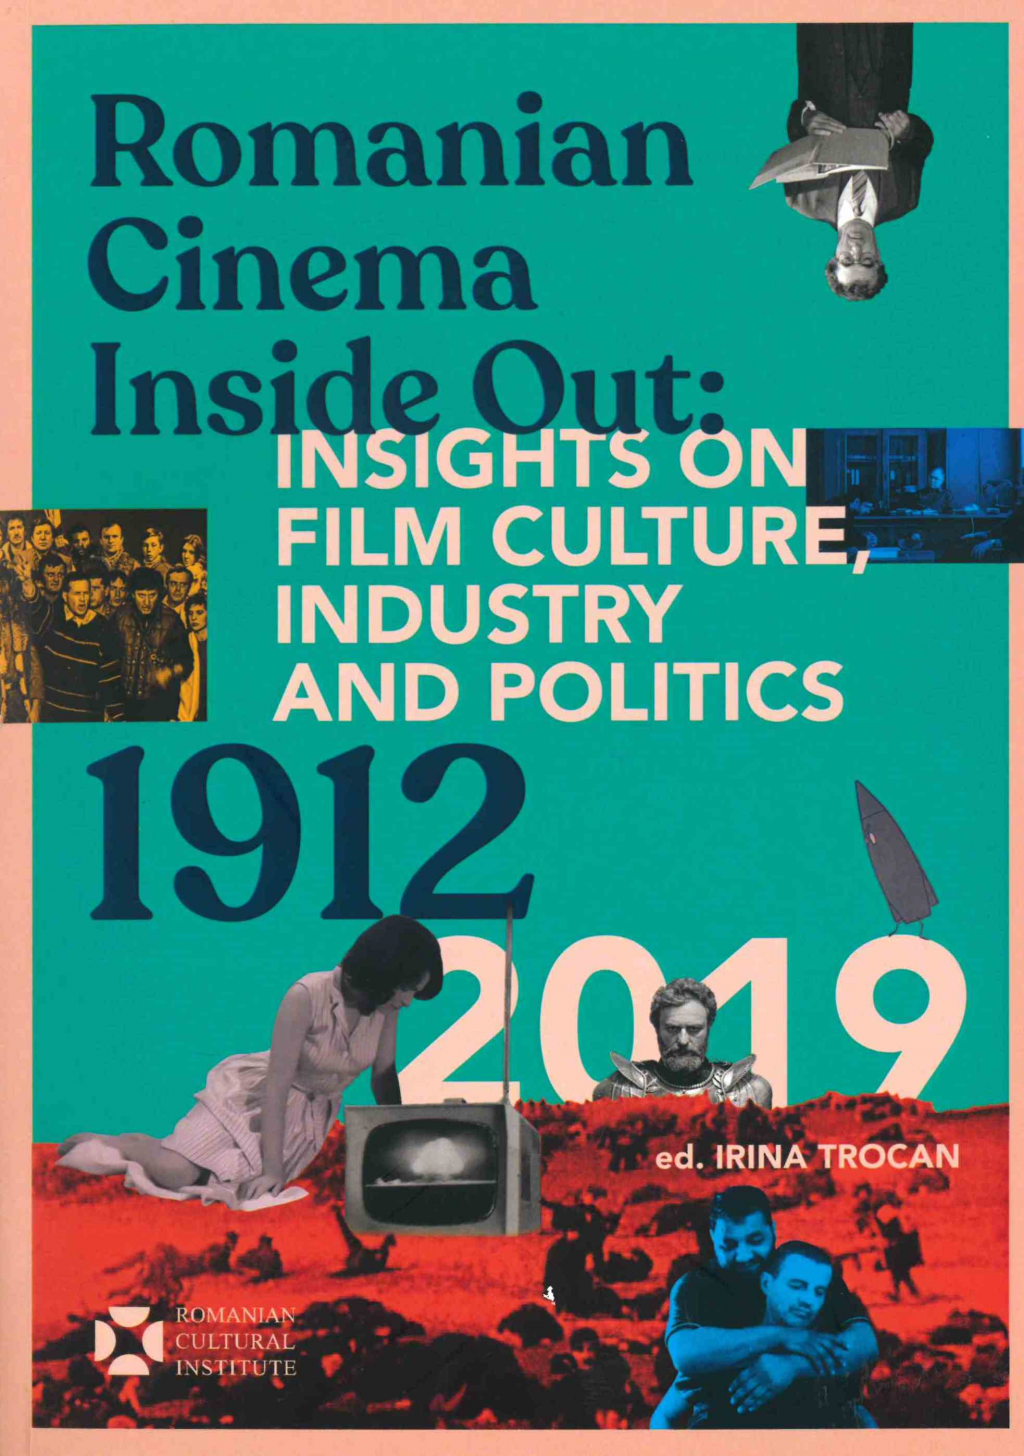 Romanian Cinema Inside Out: Insights on film culture, industry and politics (1912-2019)